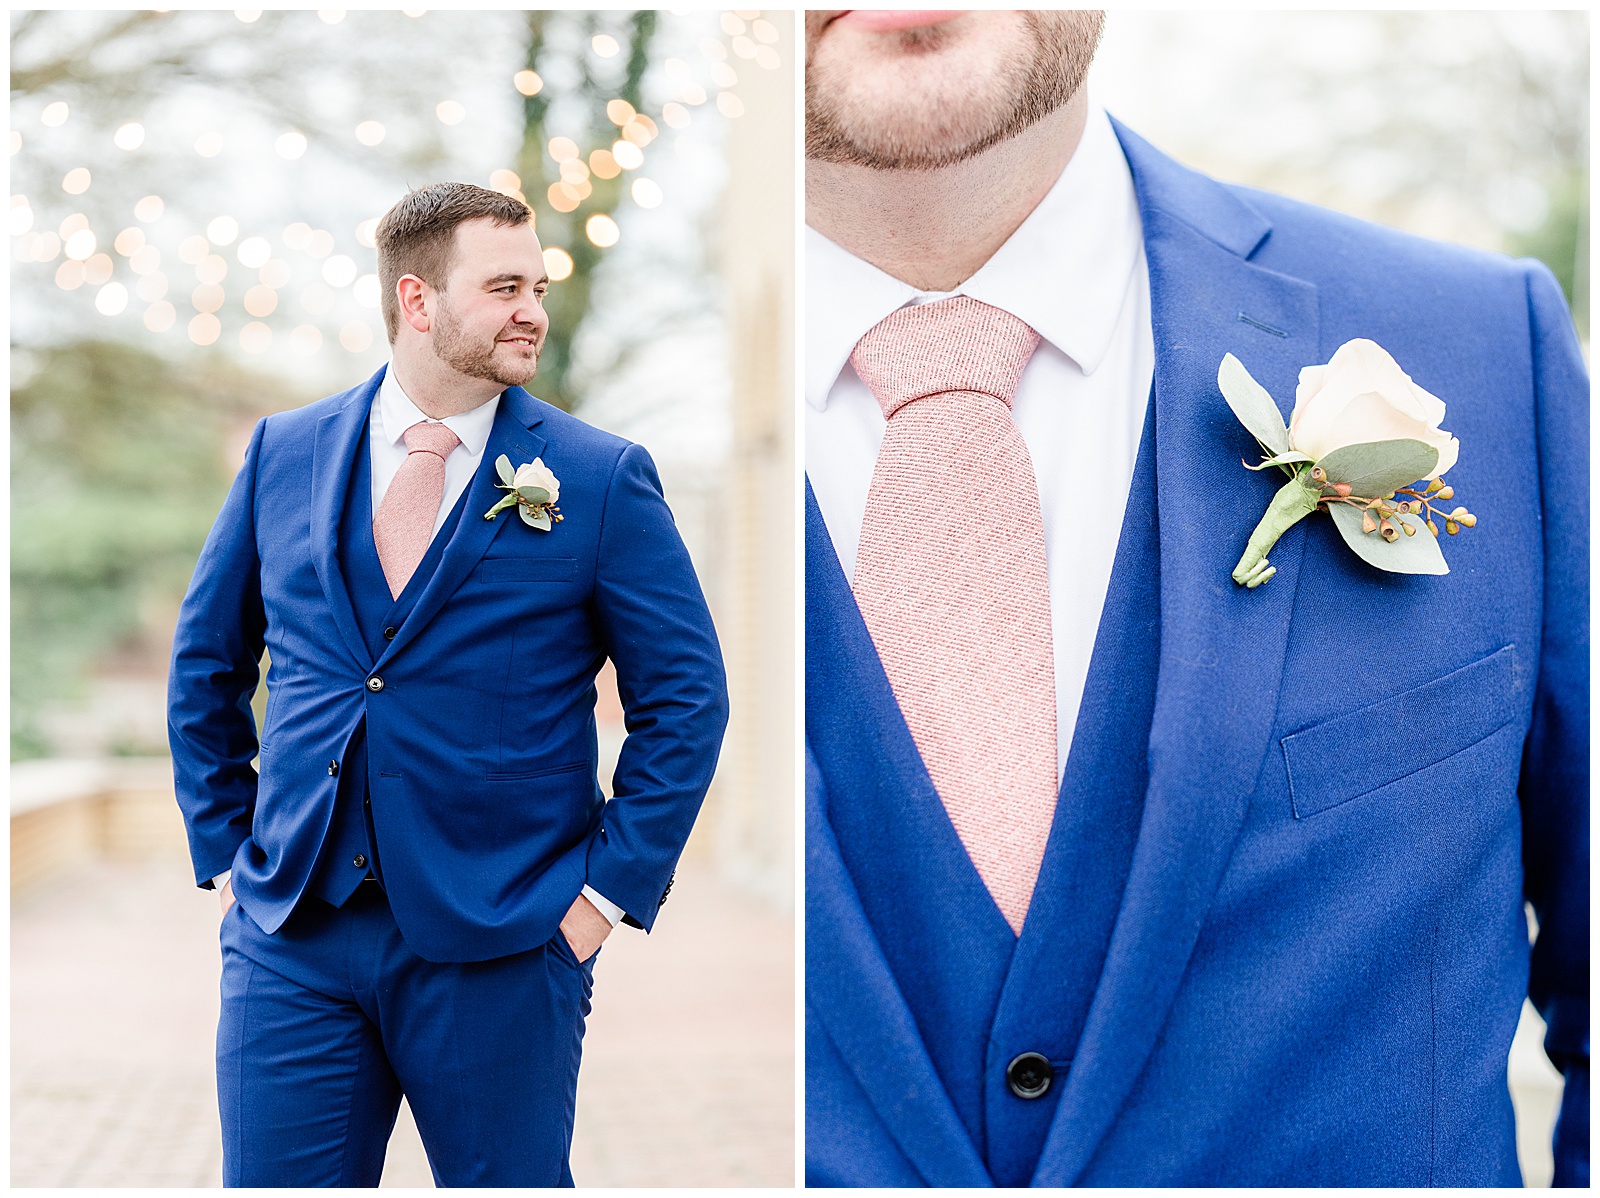 Sharp-Looking Groom Navy Blue Pink Tie Outfit Ideas from Light and Airy Outdoor Wedding at Separk Mansion in Gastonia, NC | Kevyn Dixon Photography